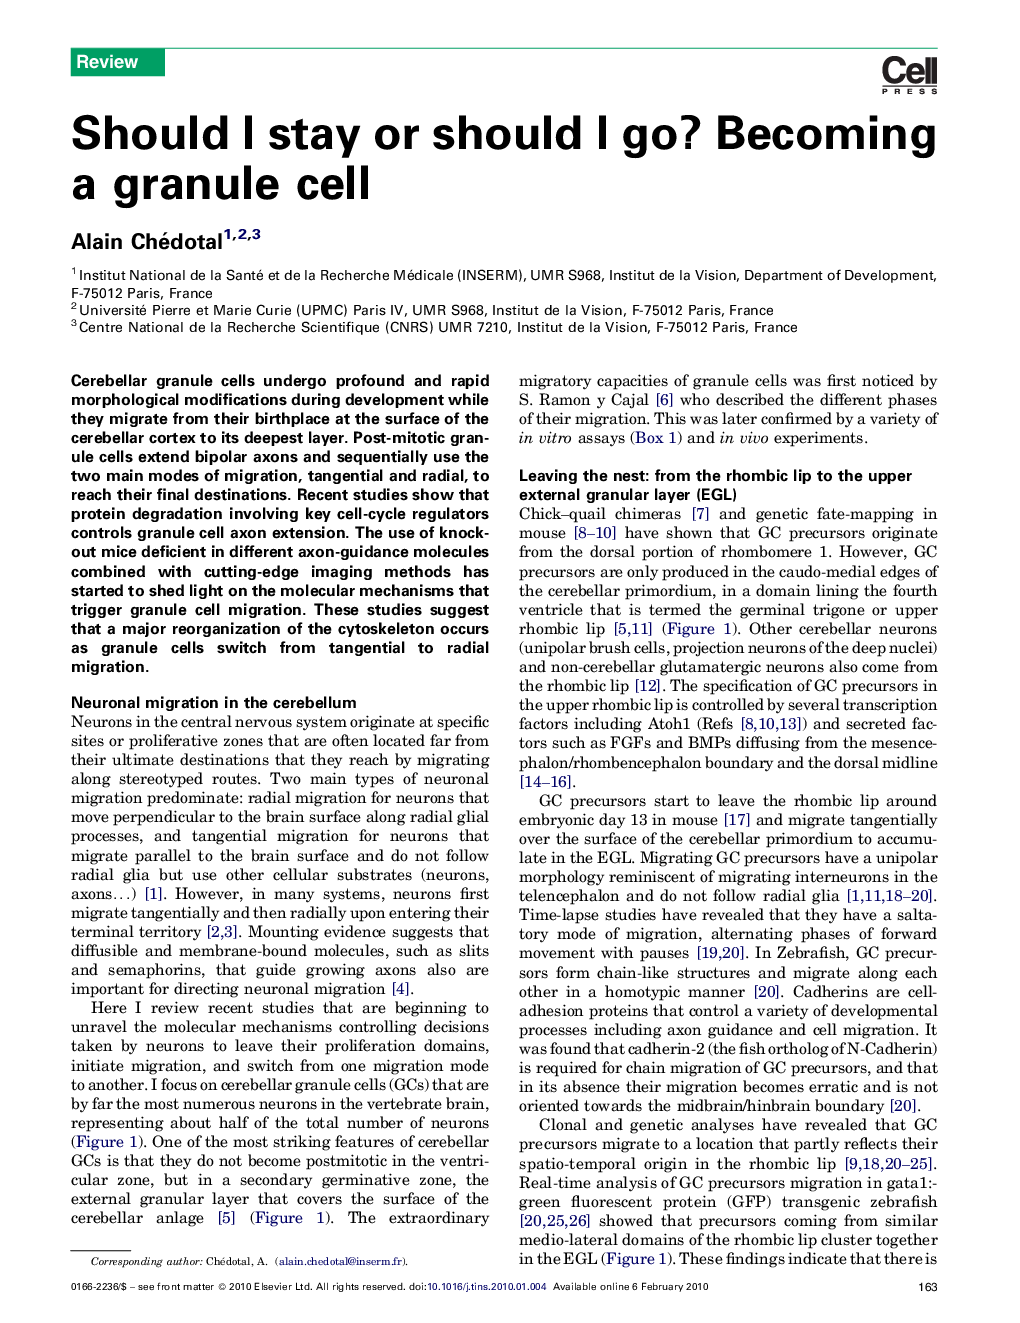 Should I stay or should I go? Becoming a granule cell